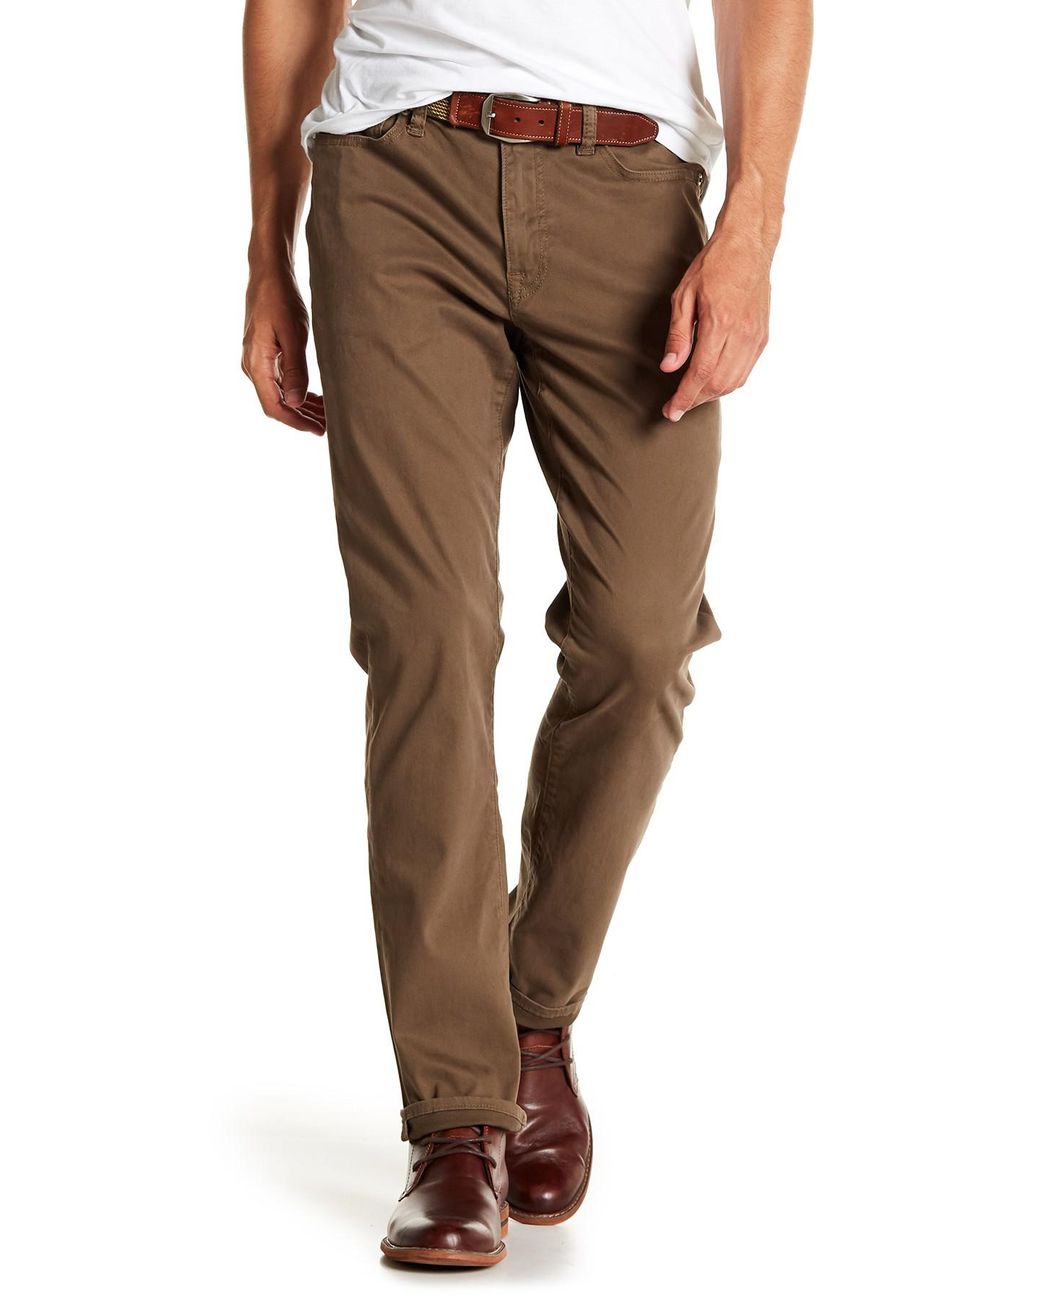 Lucky Brand 410 Athletic Slim Pants - 30-32 Inseam in Brown for Men